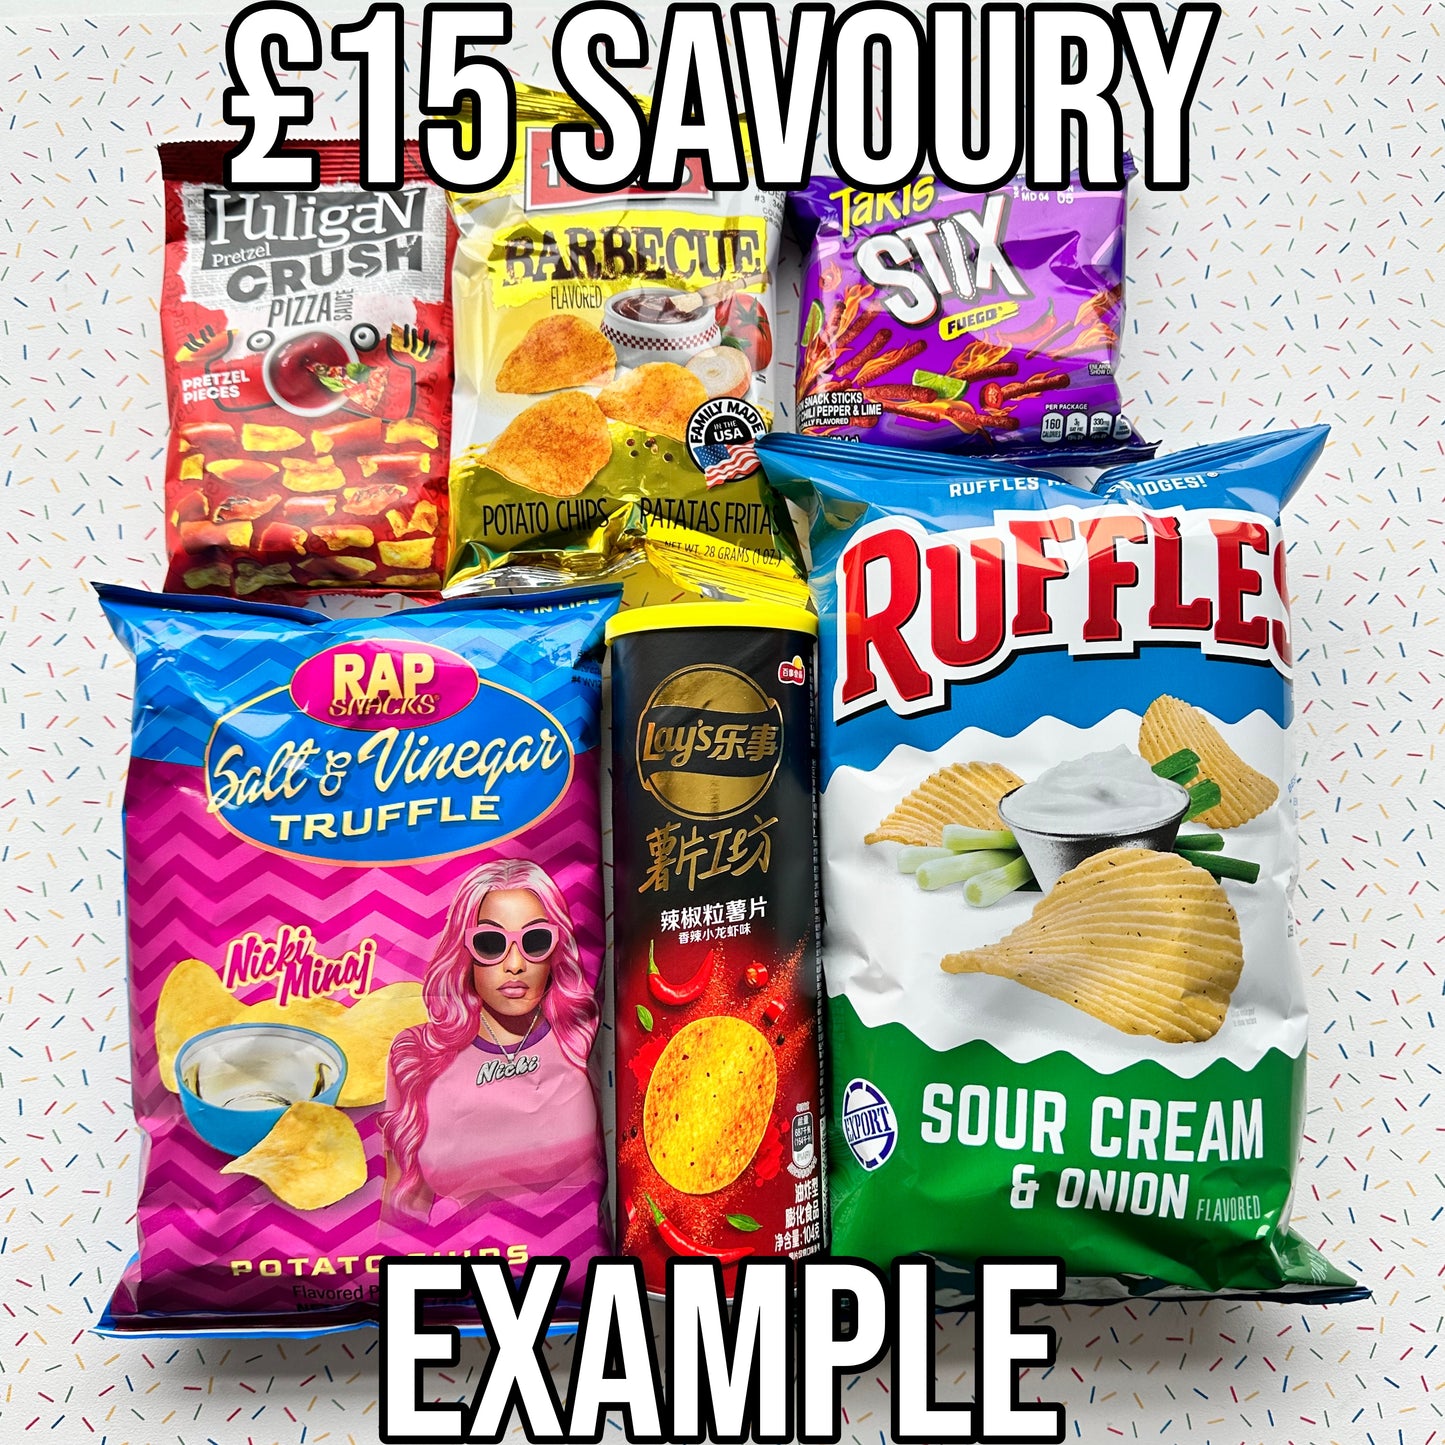 £15 randalls savoury bundle, crisps, chips, crackers, cheese puffs, tortilla chips, corn, herrs cheestix, takis fuego, herrs honey cheese, lays barbecue, bbq, combos stuffed pretzels, jalapeno, cheez-its, cheetos, flamin hot, tgifridays, huligan, pizza, hot, spicy